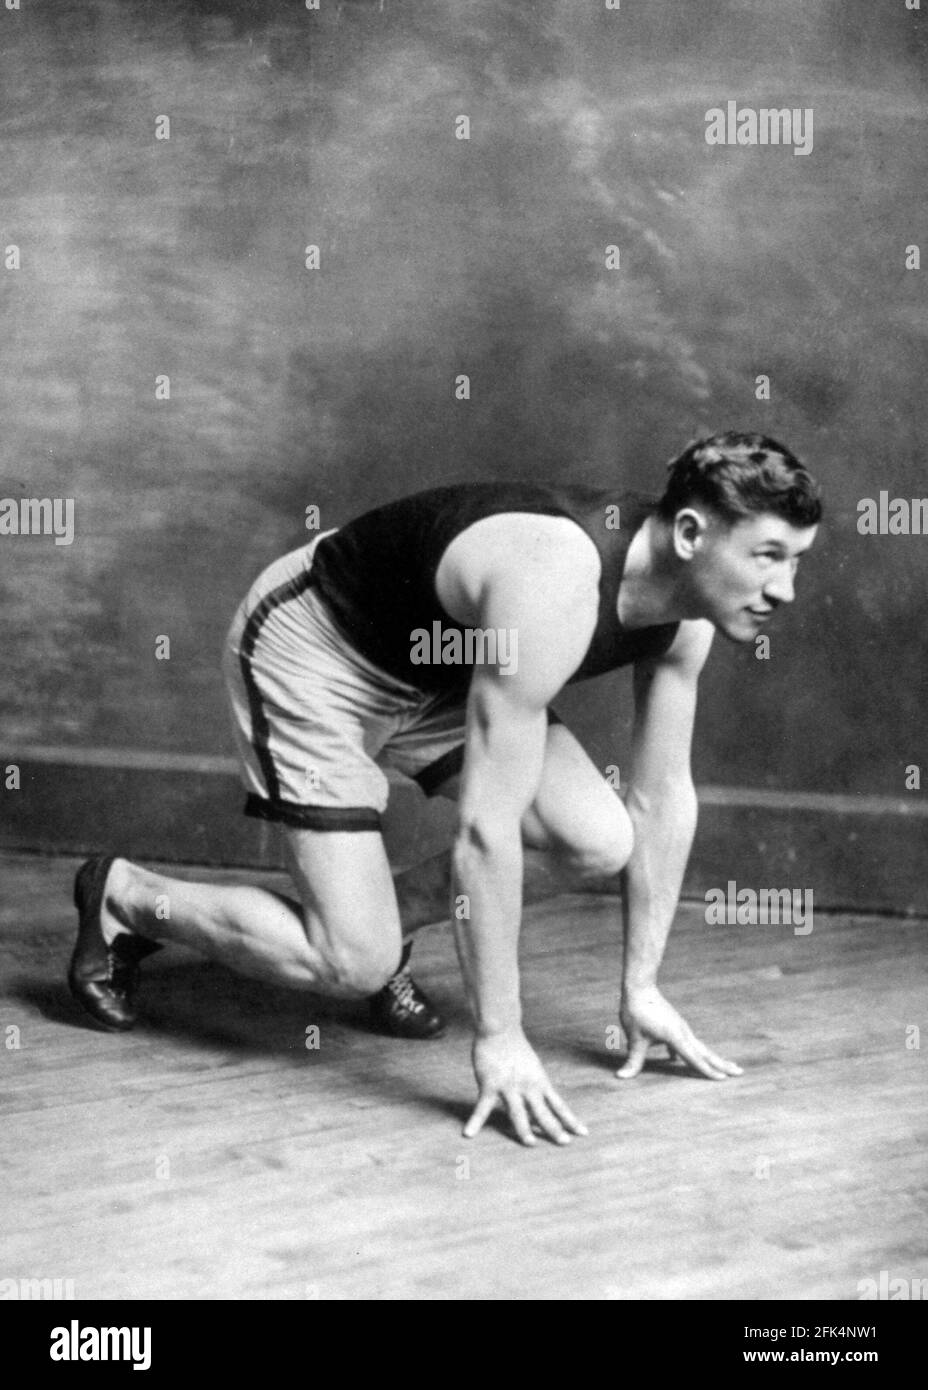 Jim Thorpe. Portrait of the American athlete and Olympic gold medallist, James Francis Thorpe (1887-1953), c. 1910 Stock Photo